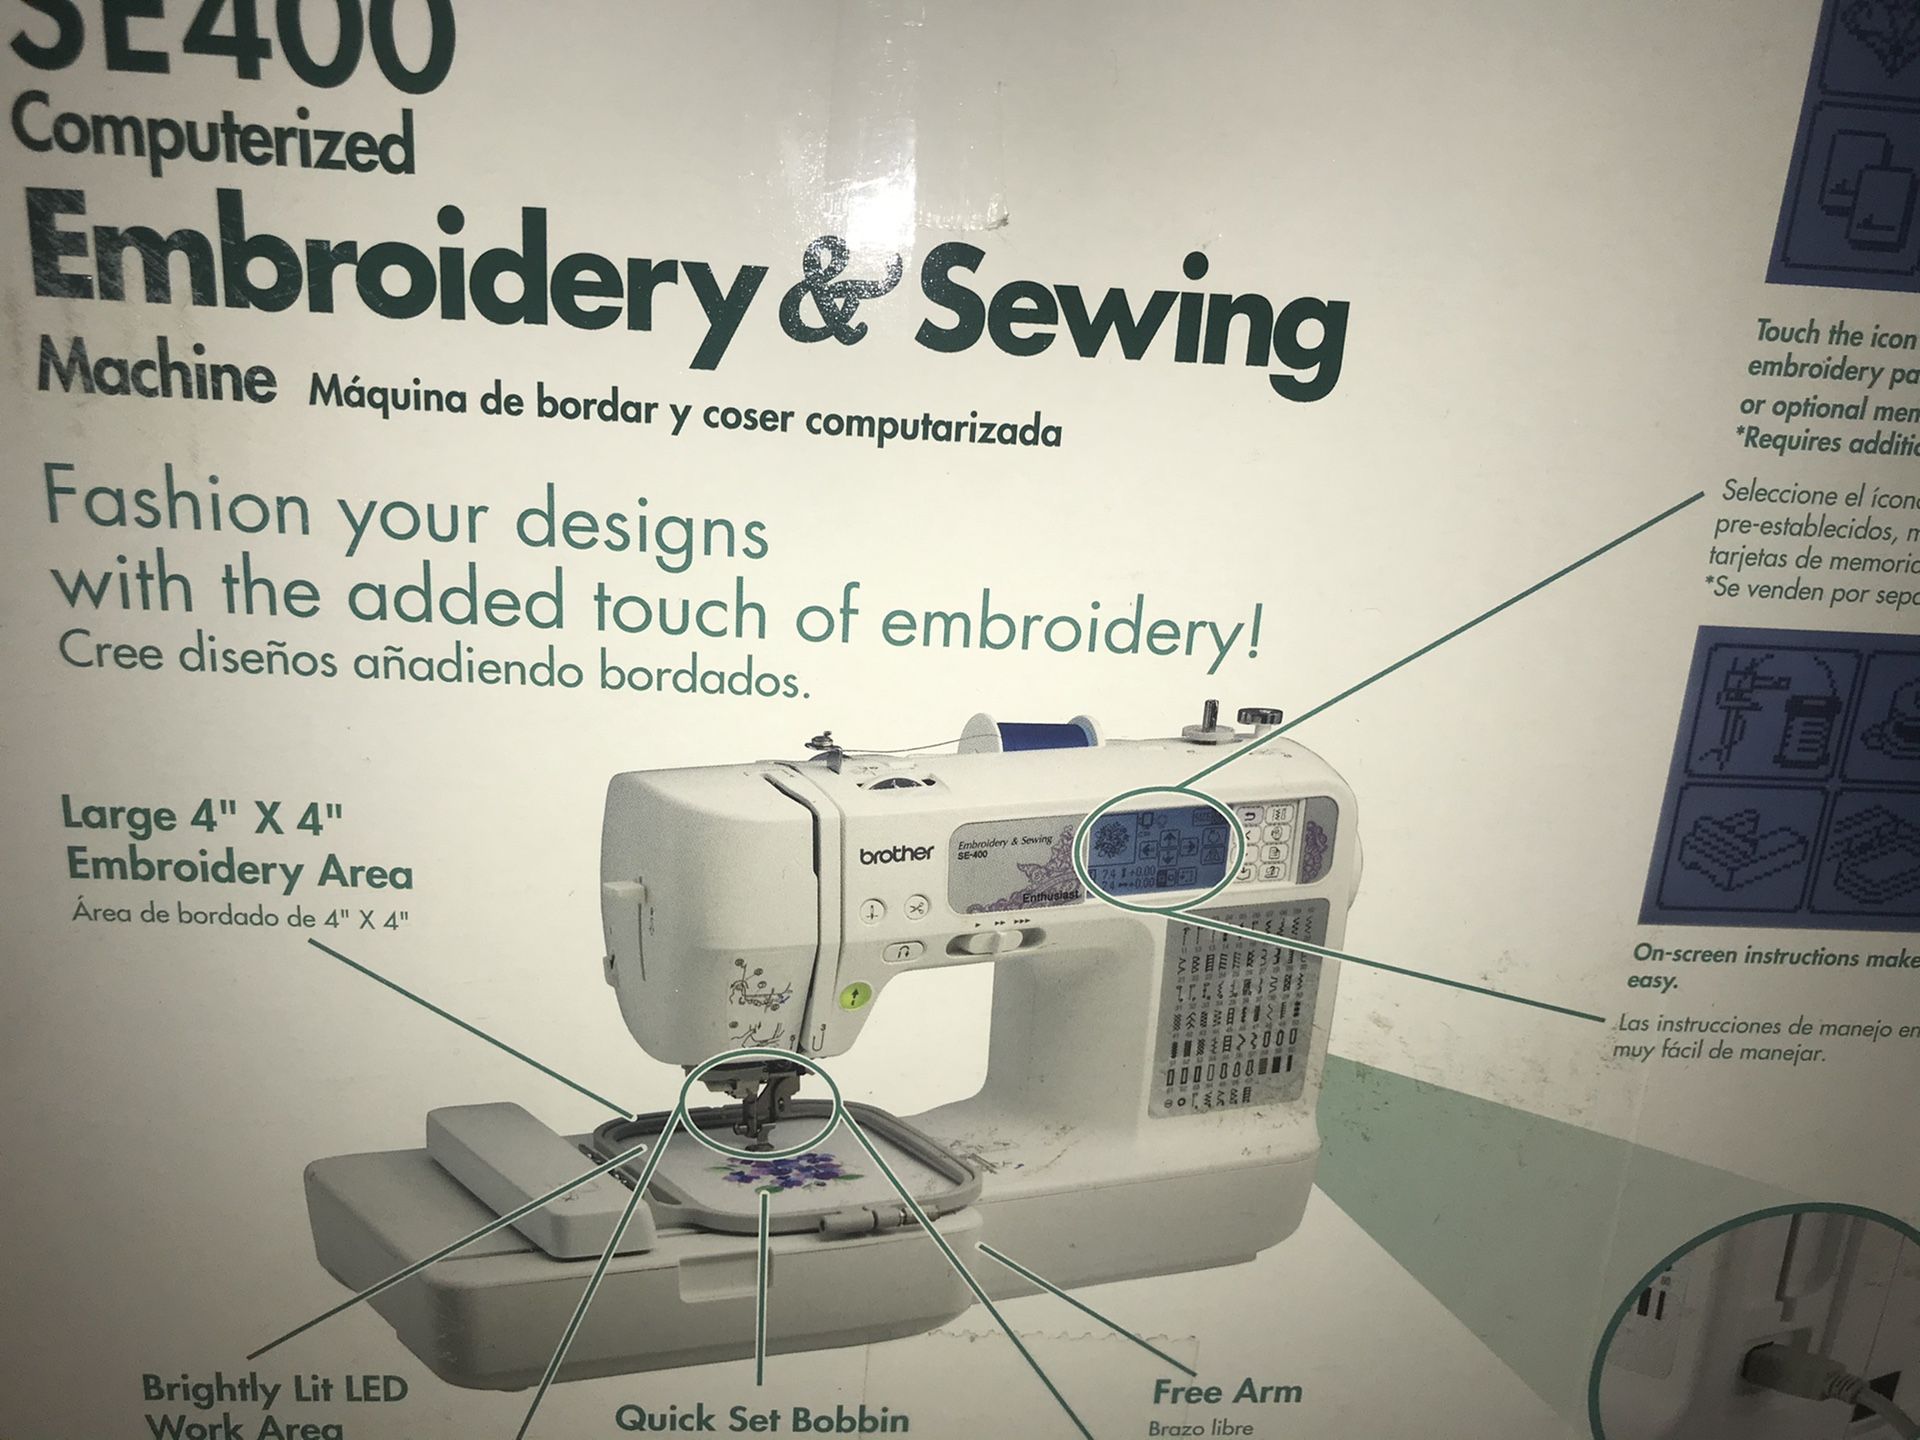 Embroidery and sewing